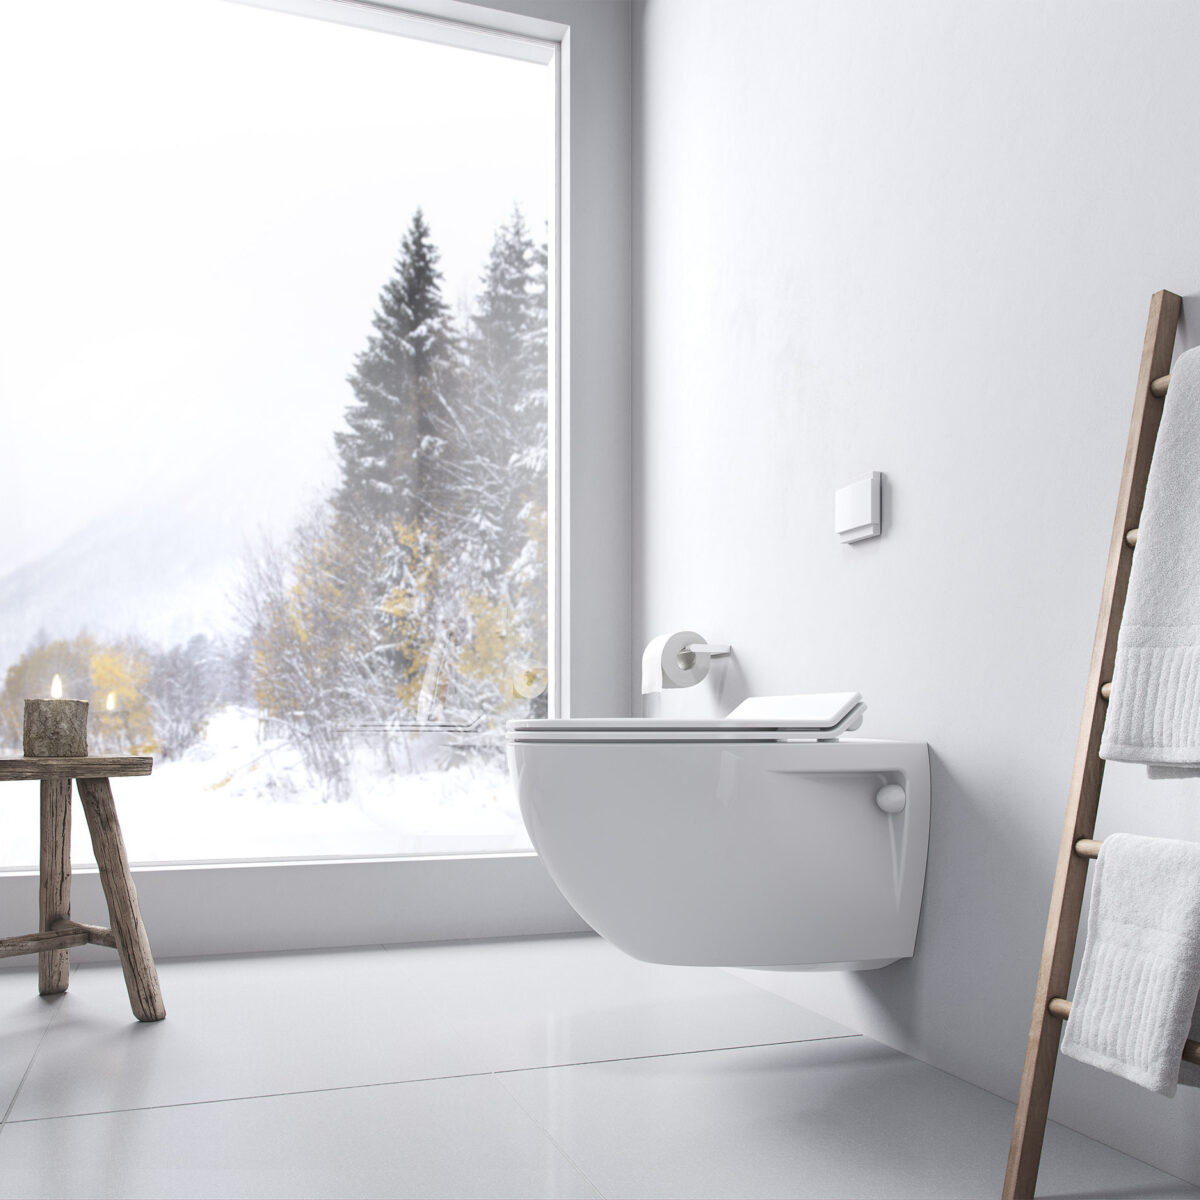 Jets image 3 D interior toilet porcelain wall Jade view winter small